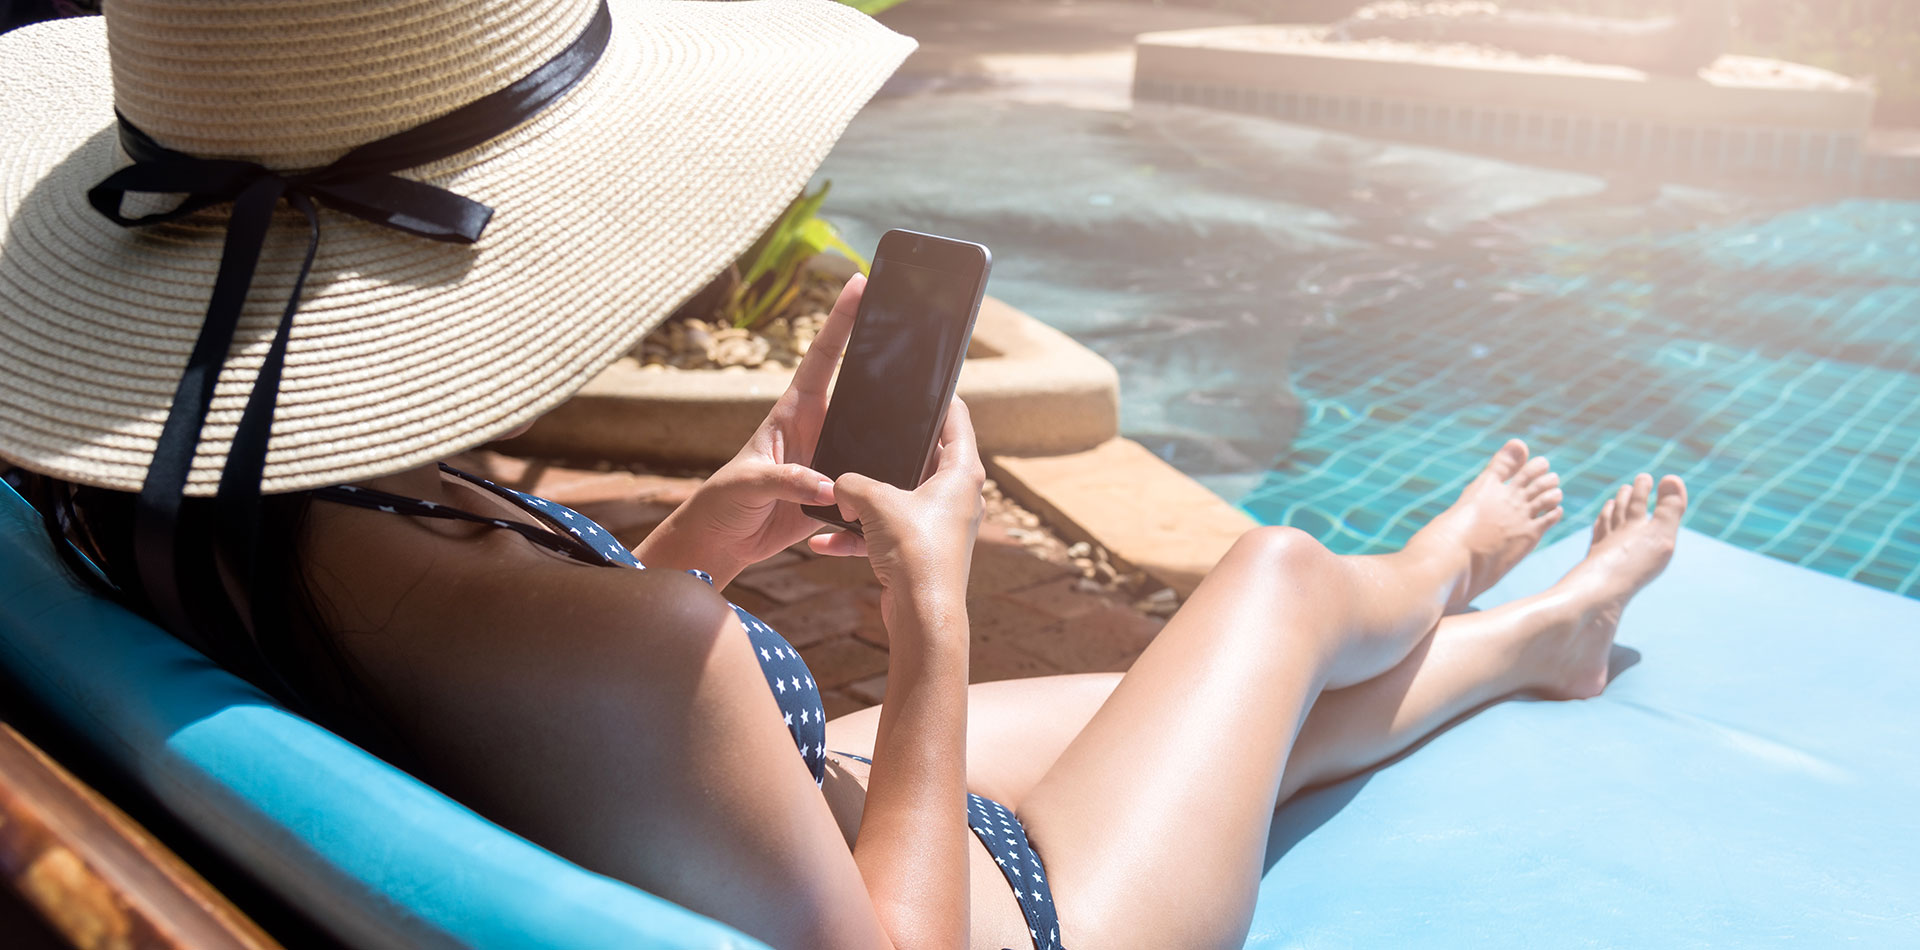 woman on her phone by the pool